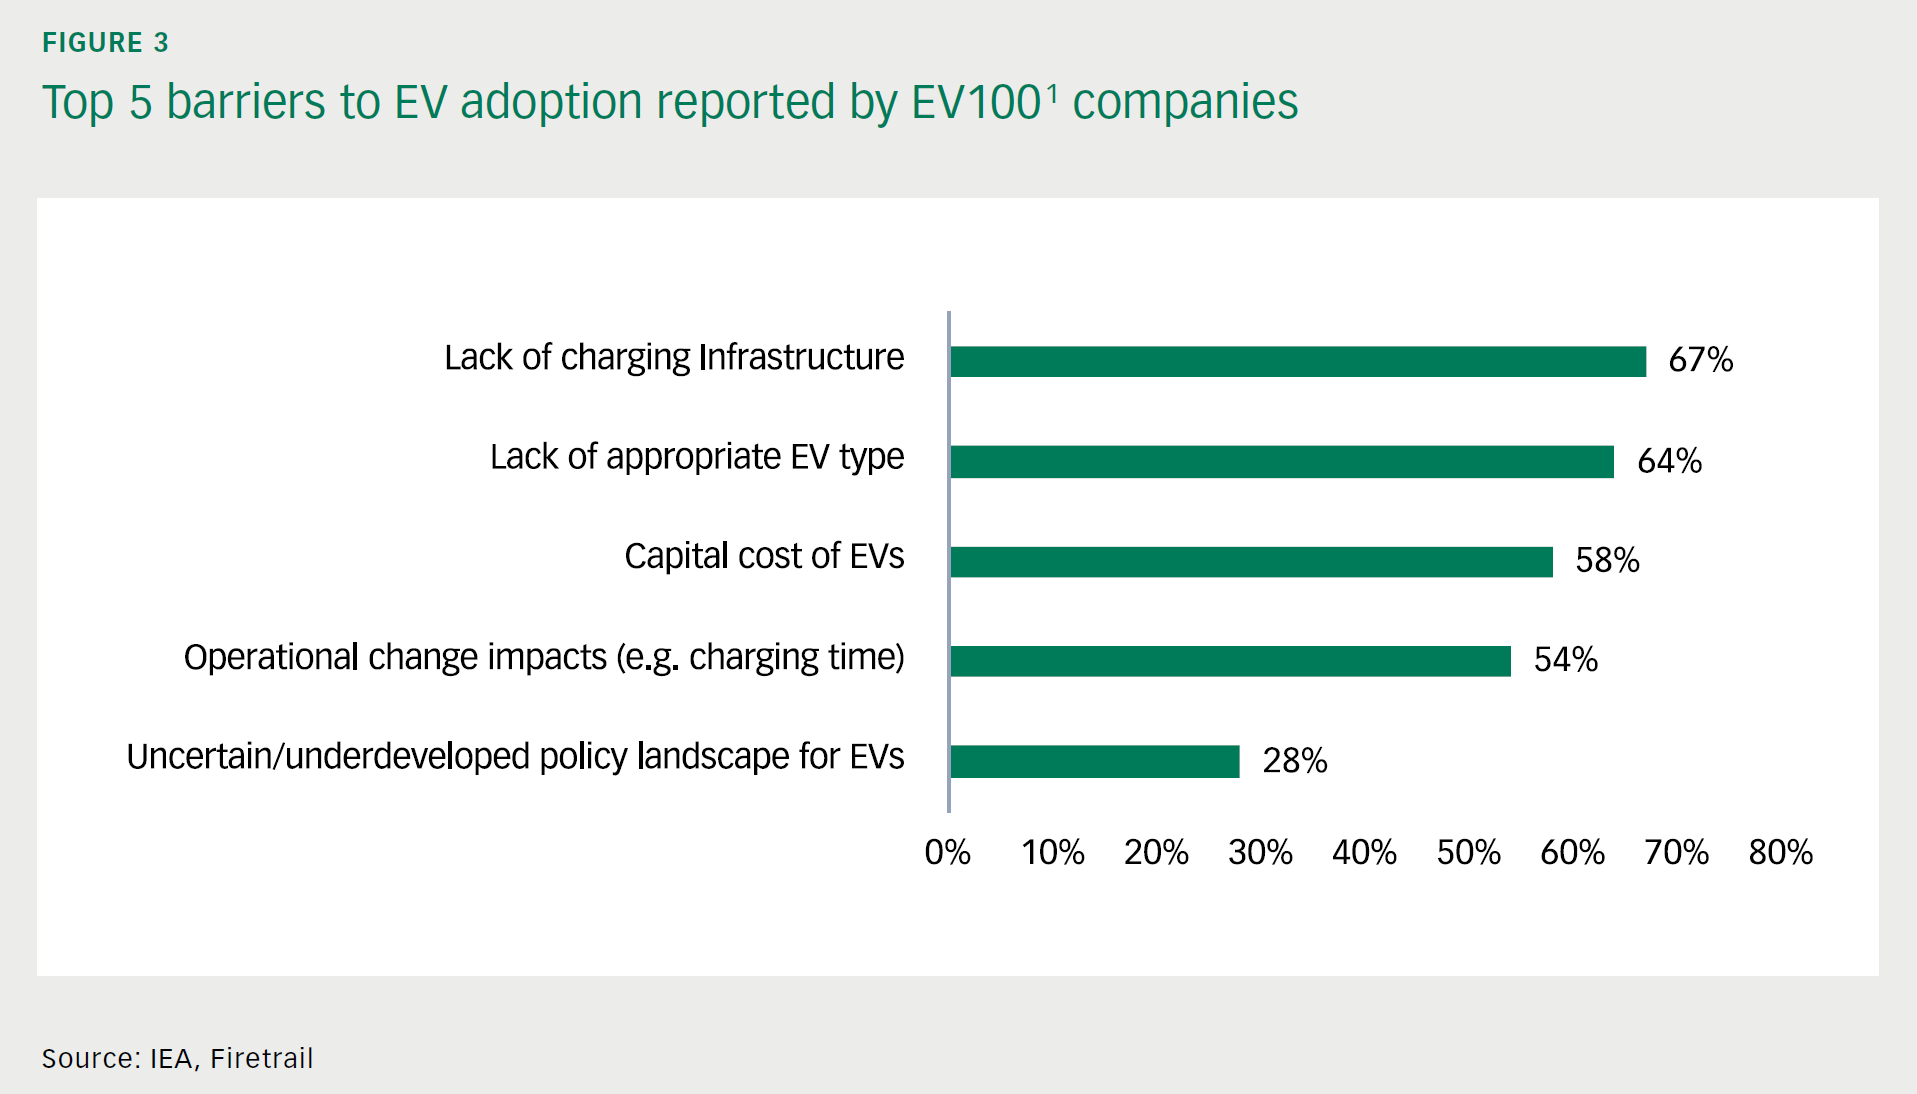 Top 5 barriers to EV adoption reported by EV1001 companies